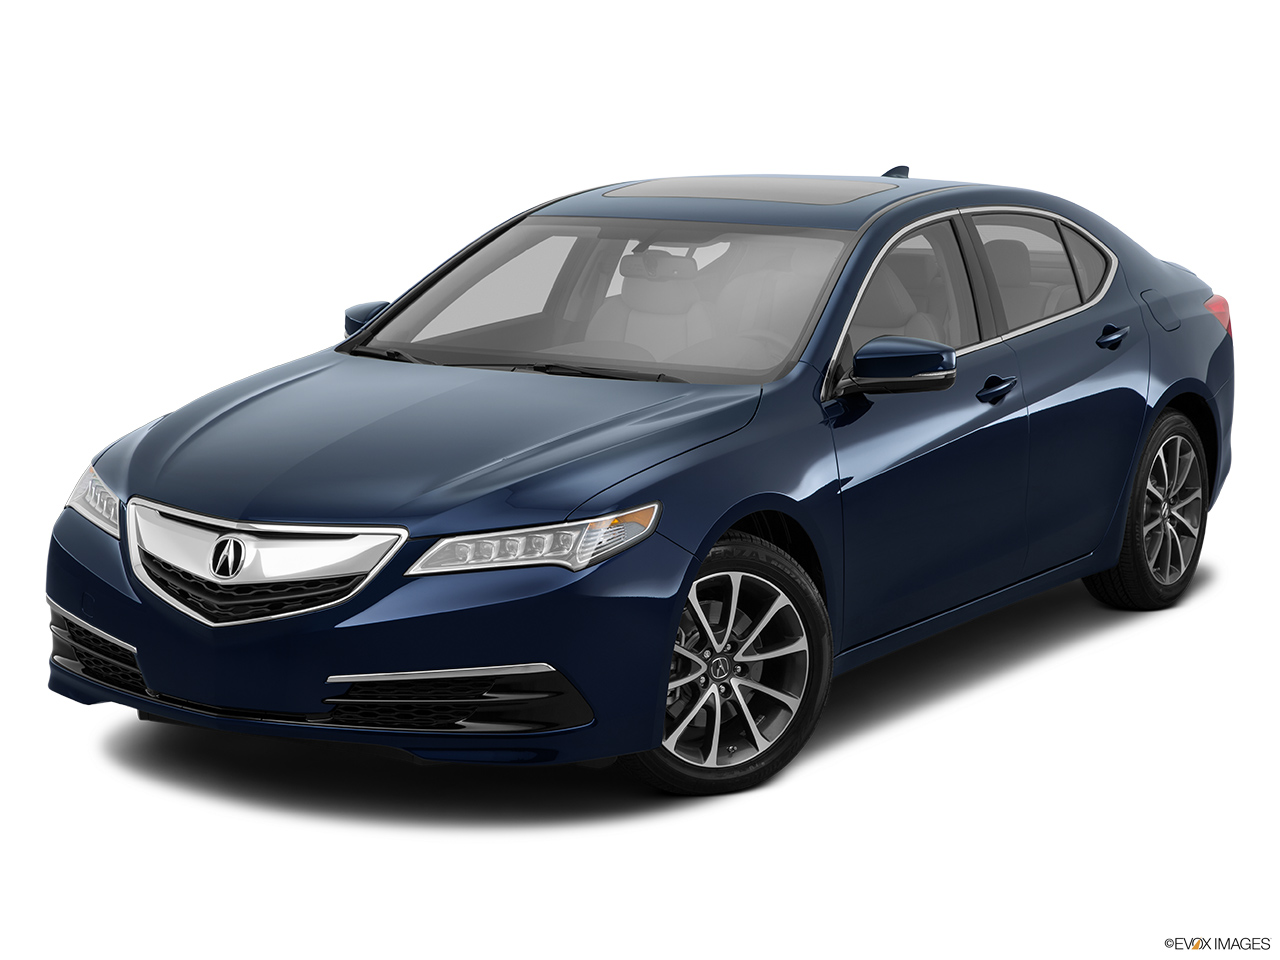 2016 Acura TLX 3.5 V-6 9-AT P-AWS Front angle view. 